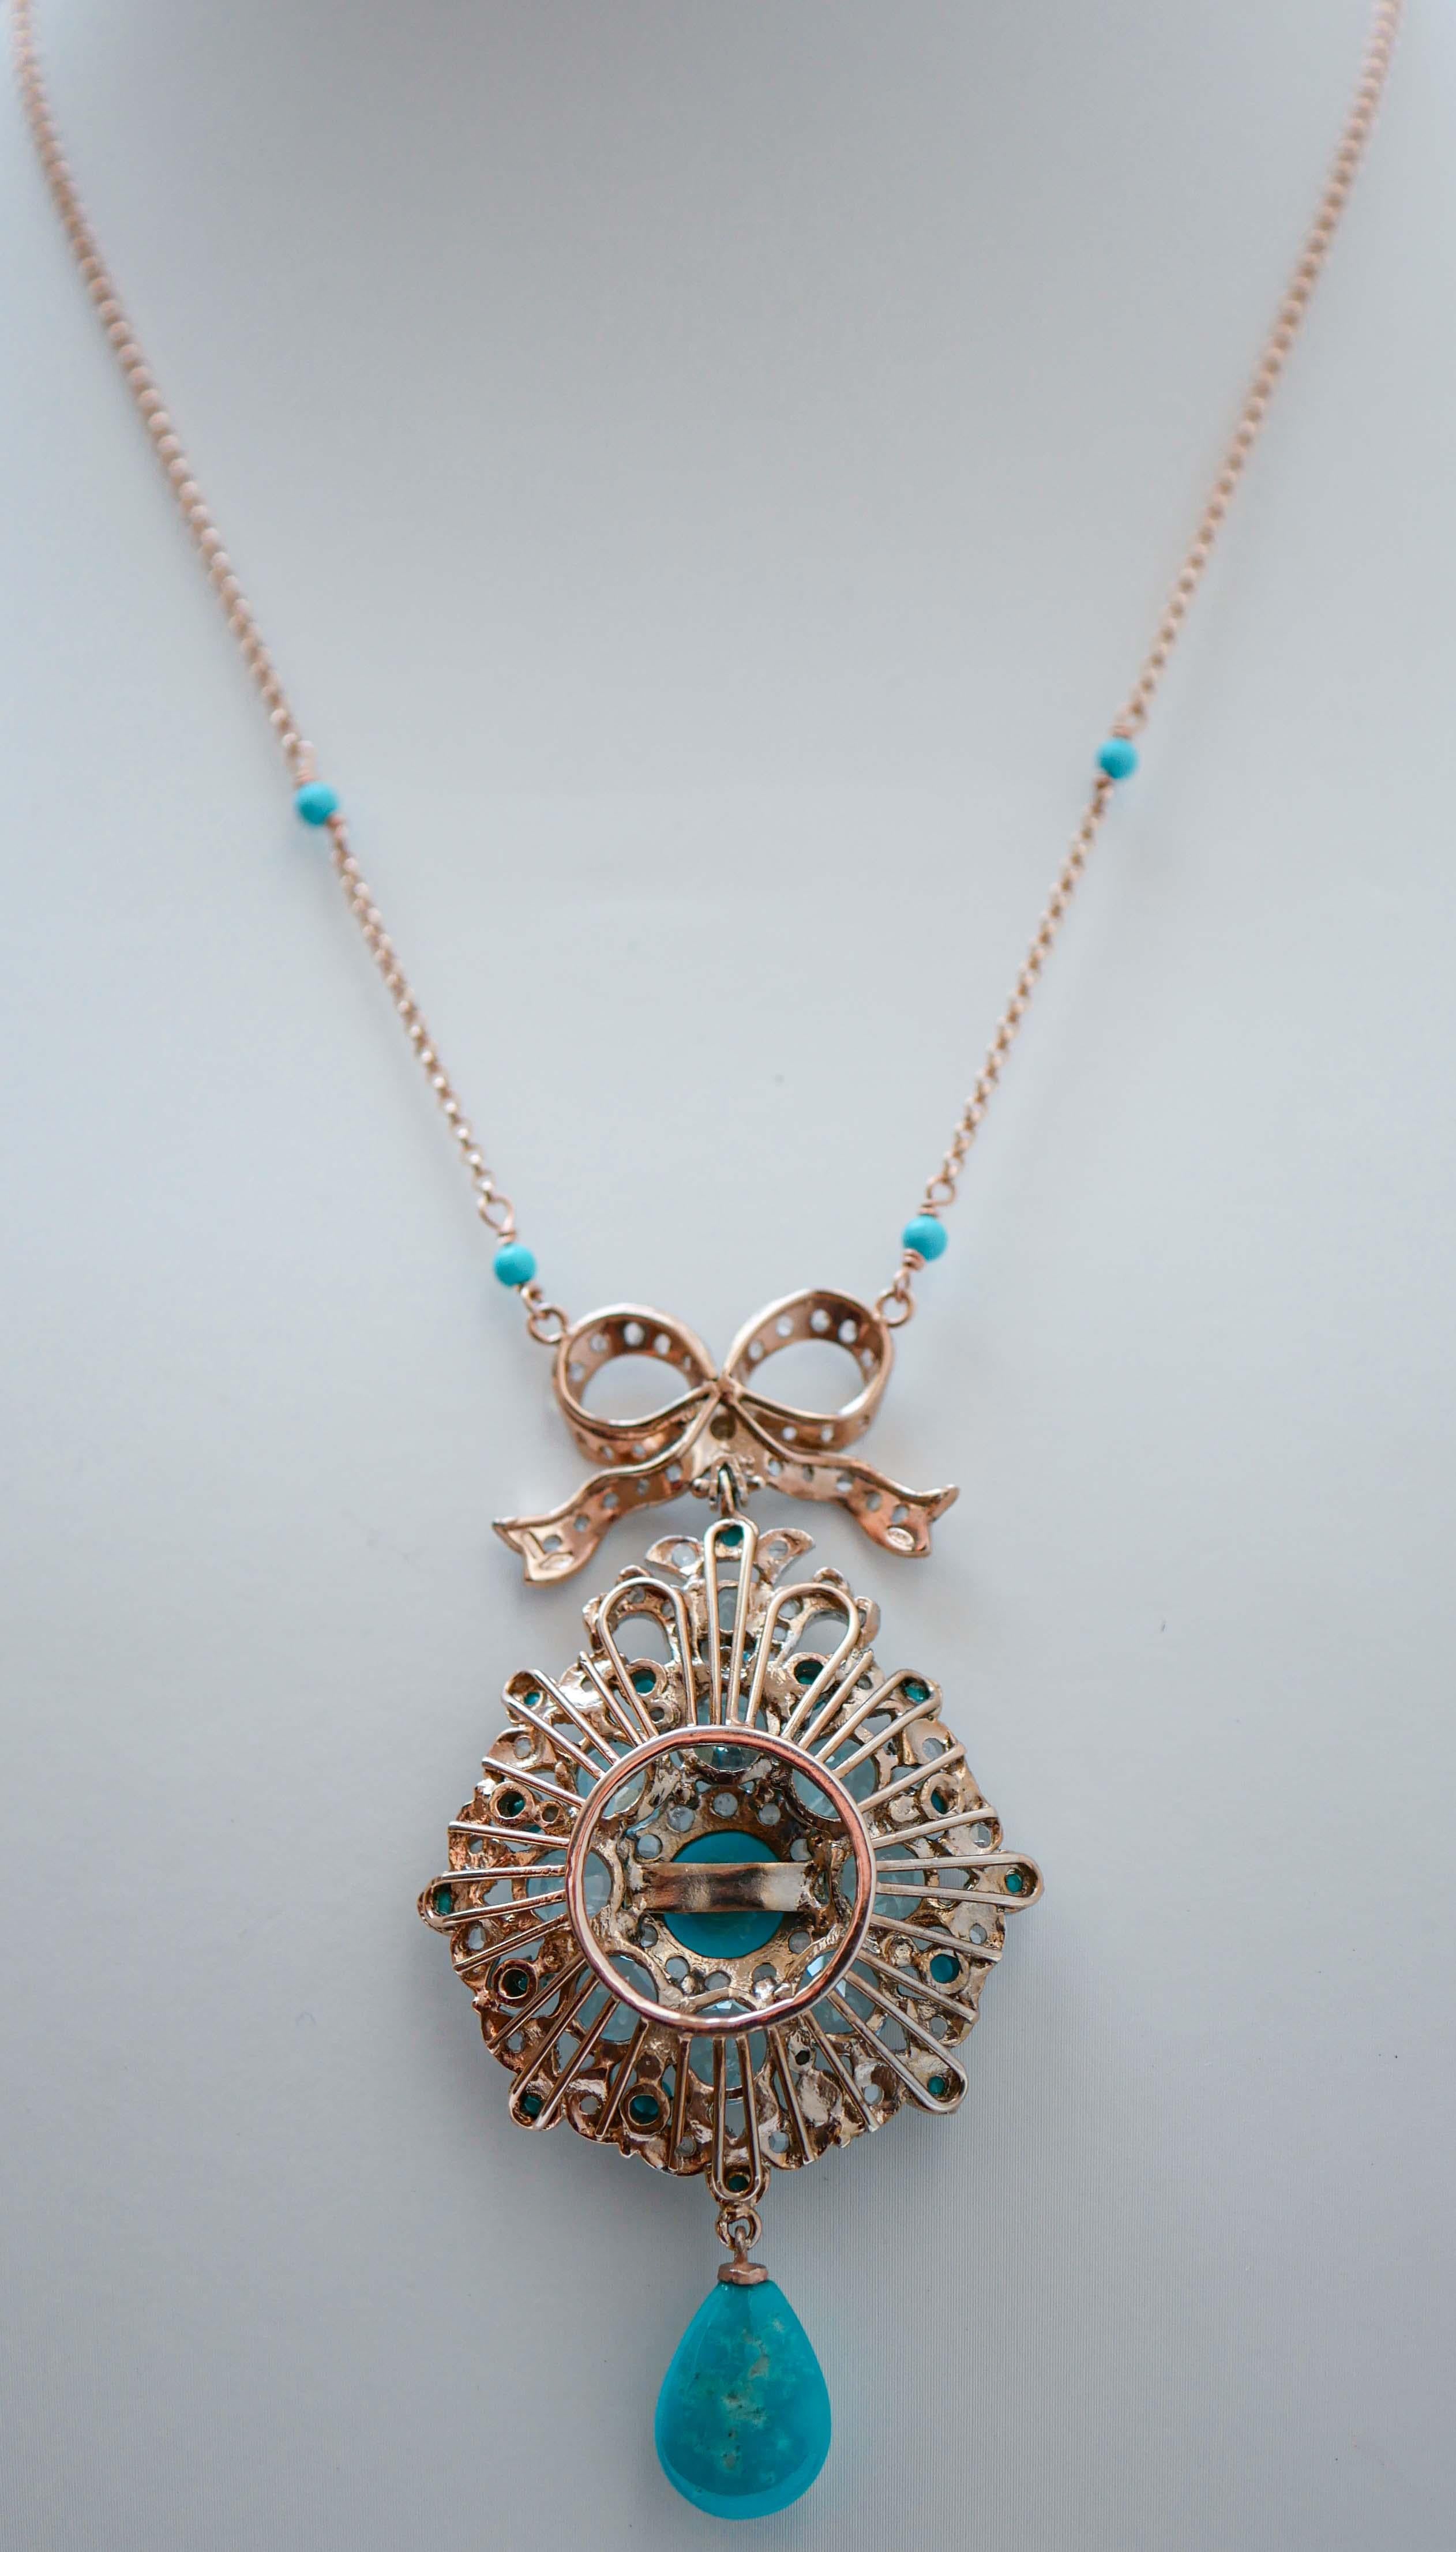 Mixed Cut Aquamarine Colour Topazs, Turquoise, Diamonds, Gold and Silver Pendant Necklace.